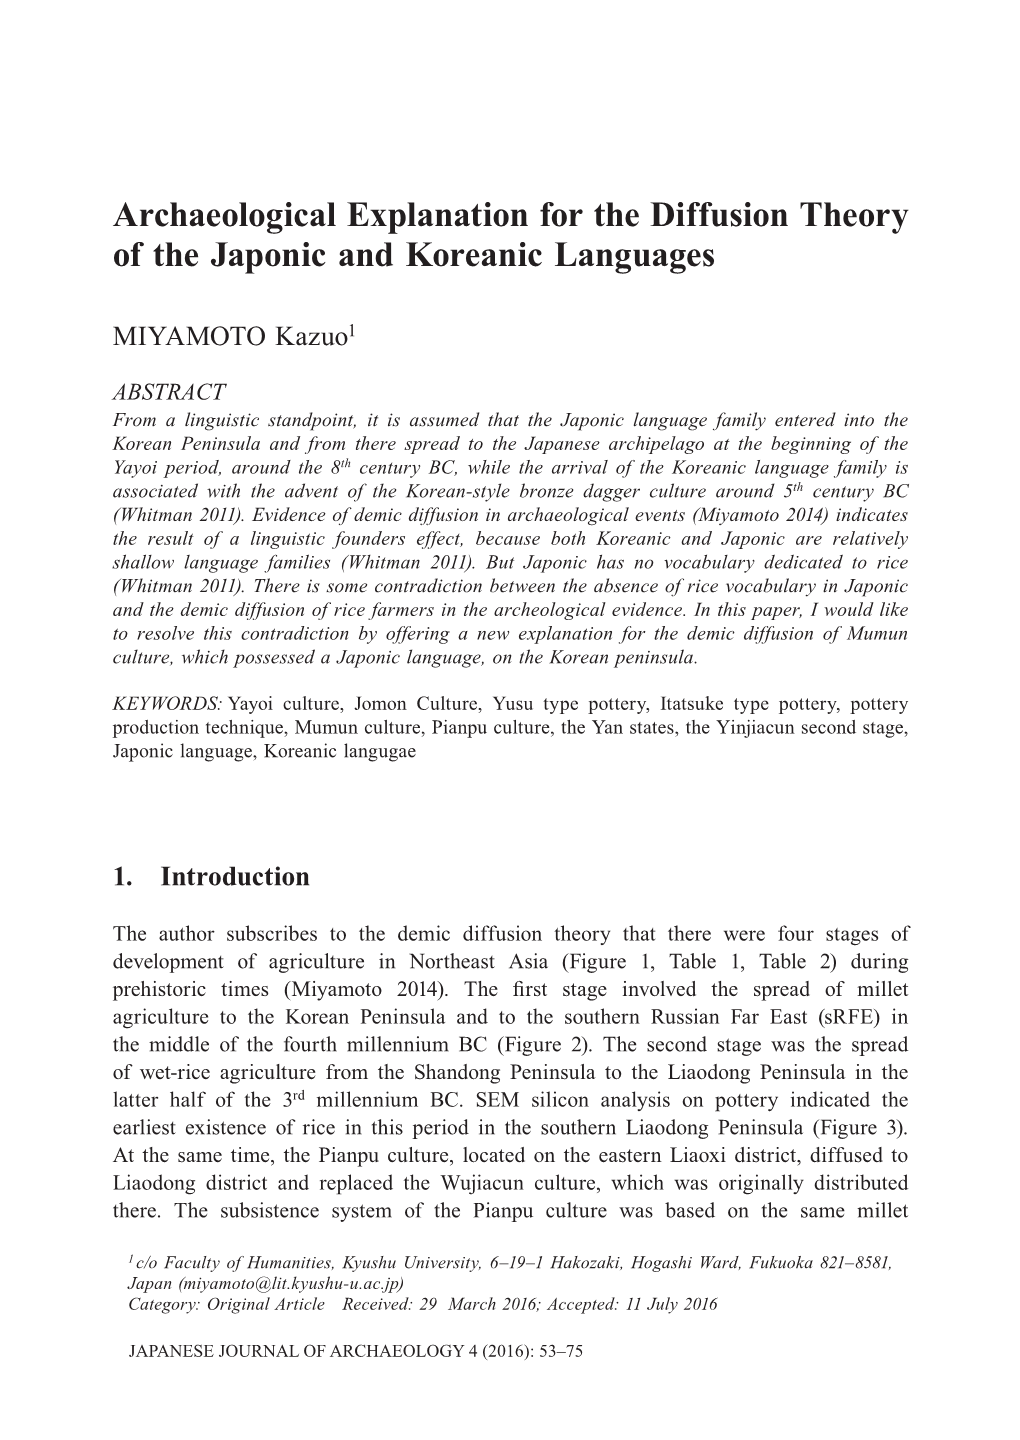 Archaeological Explanation for the Diffusion Theory of the Japonic and Koreanic Languages